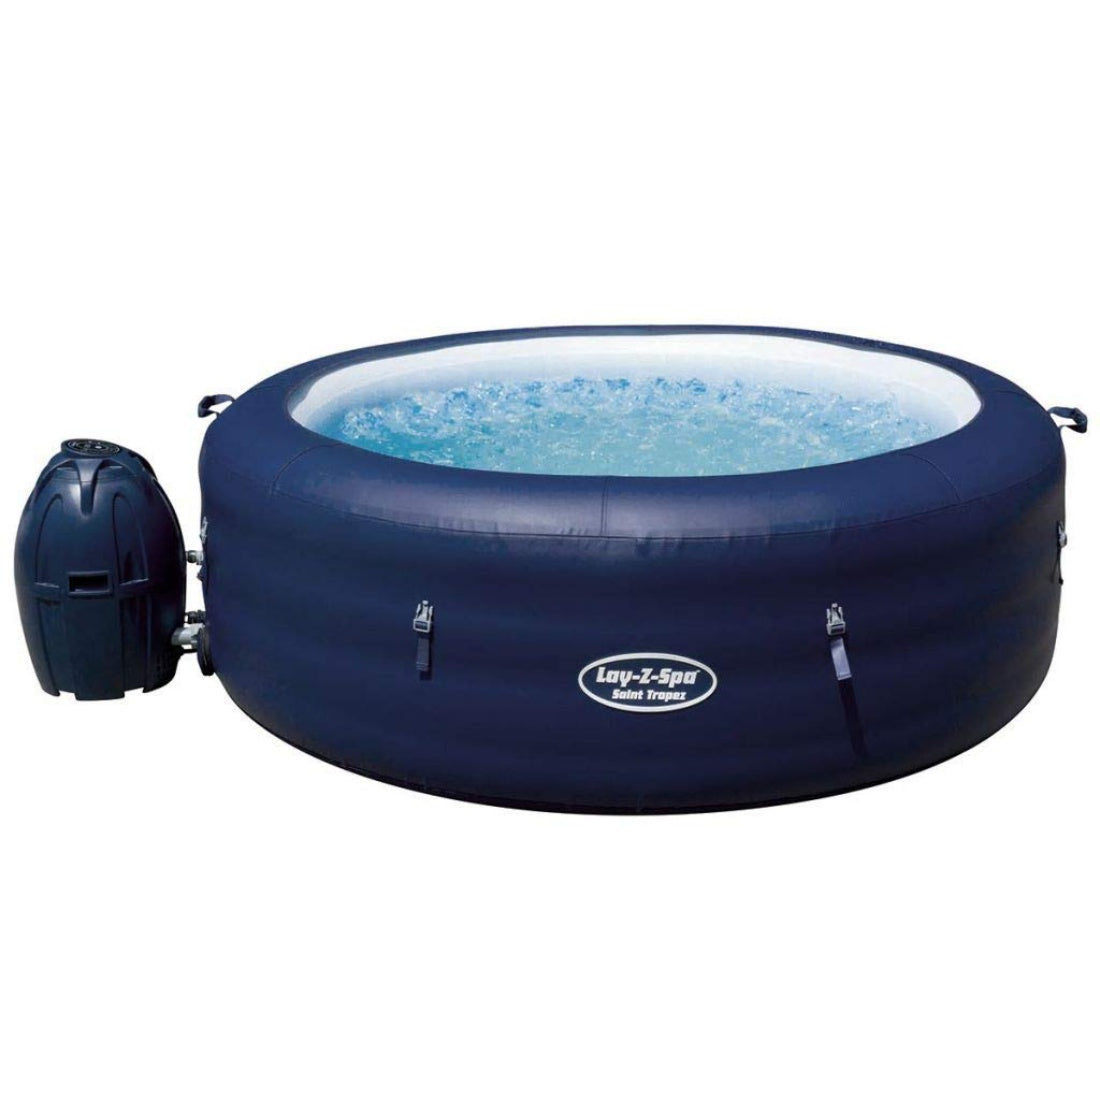 Bestway Lay-Z Spa SAINT TROPEZ + Shelter + Pillow + Cup + 2 Additional Filters